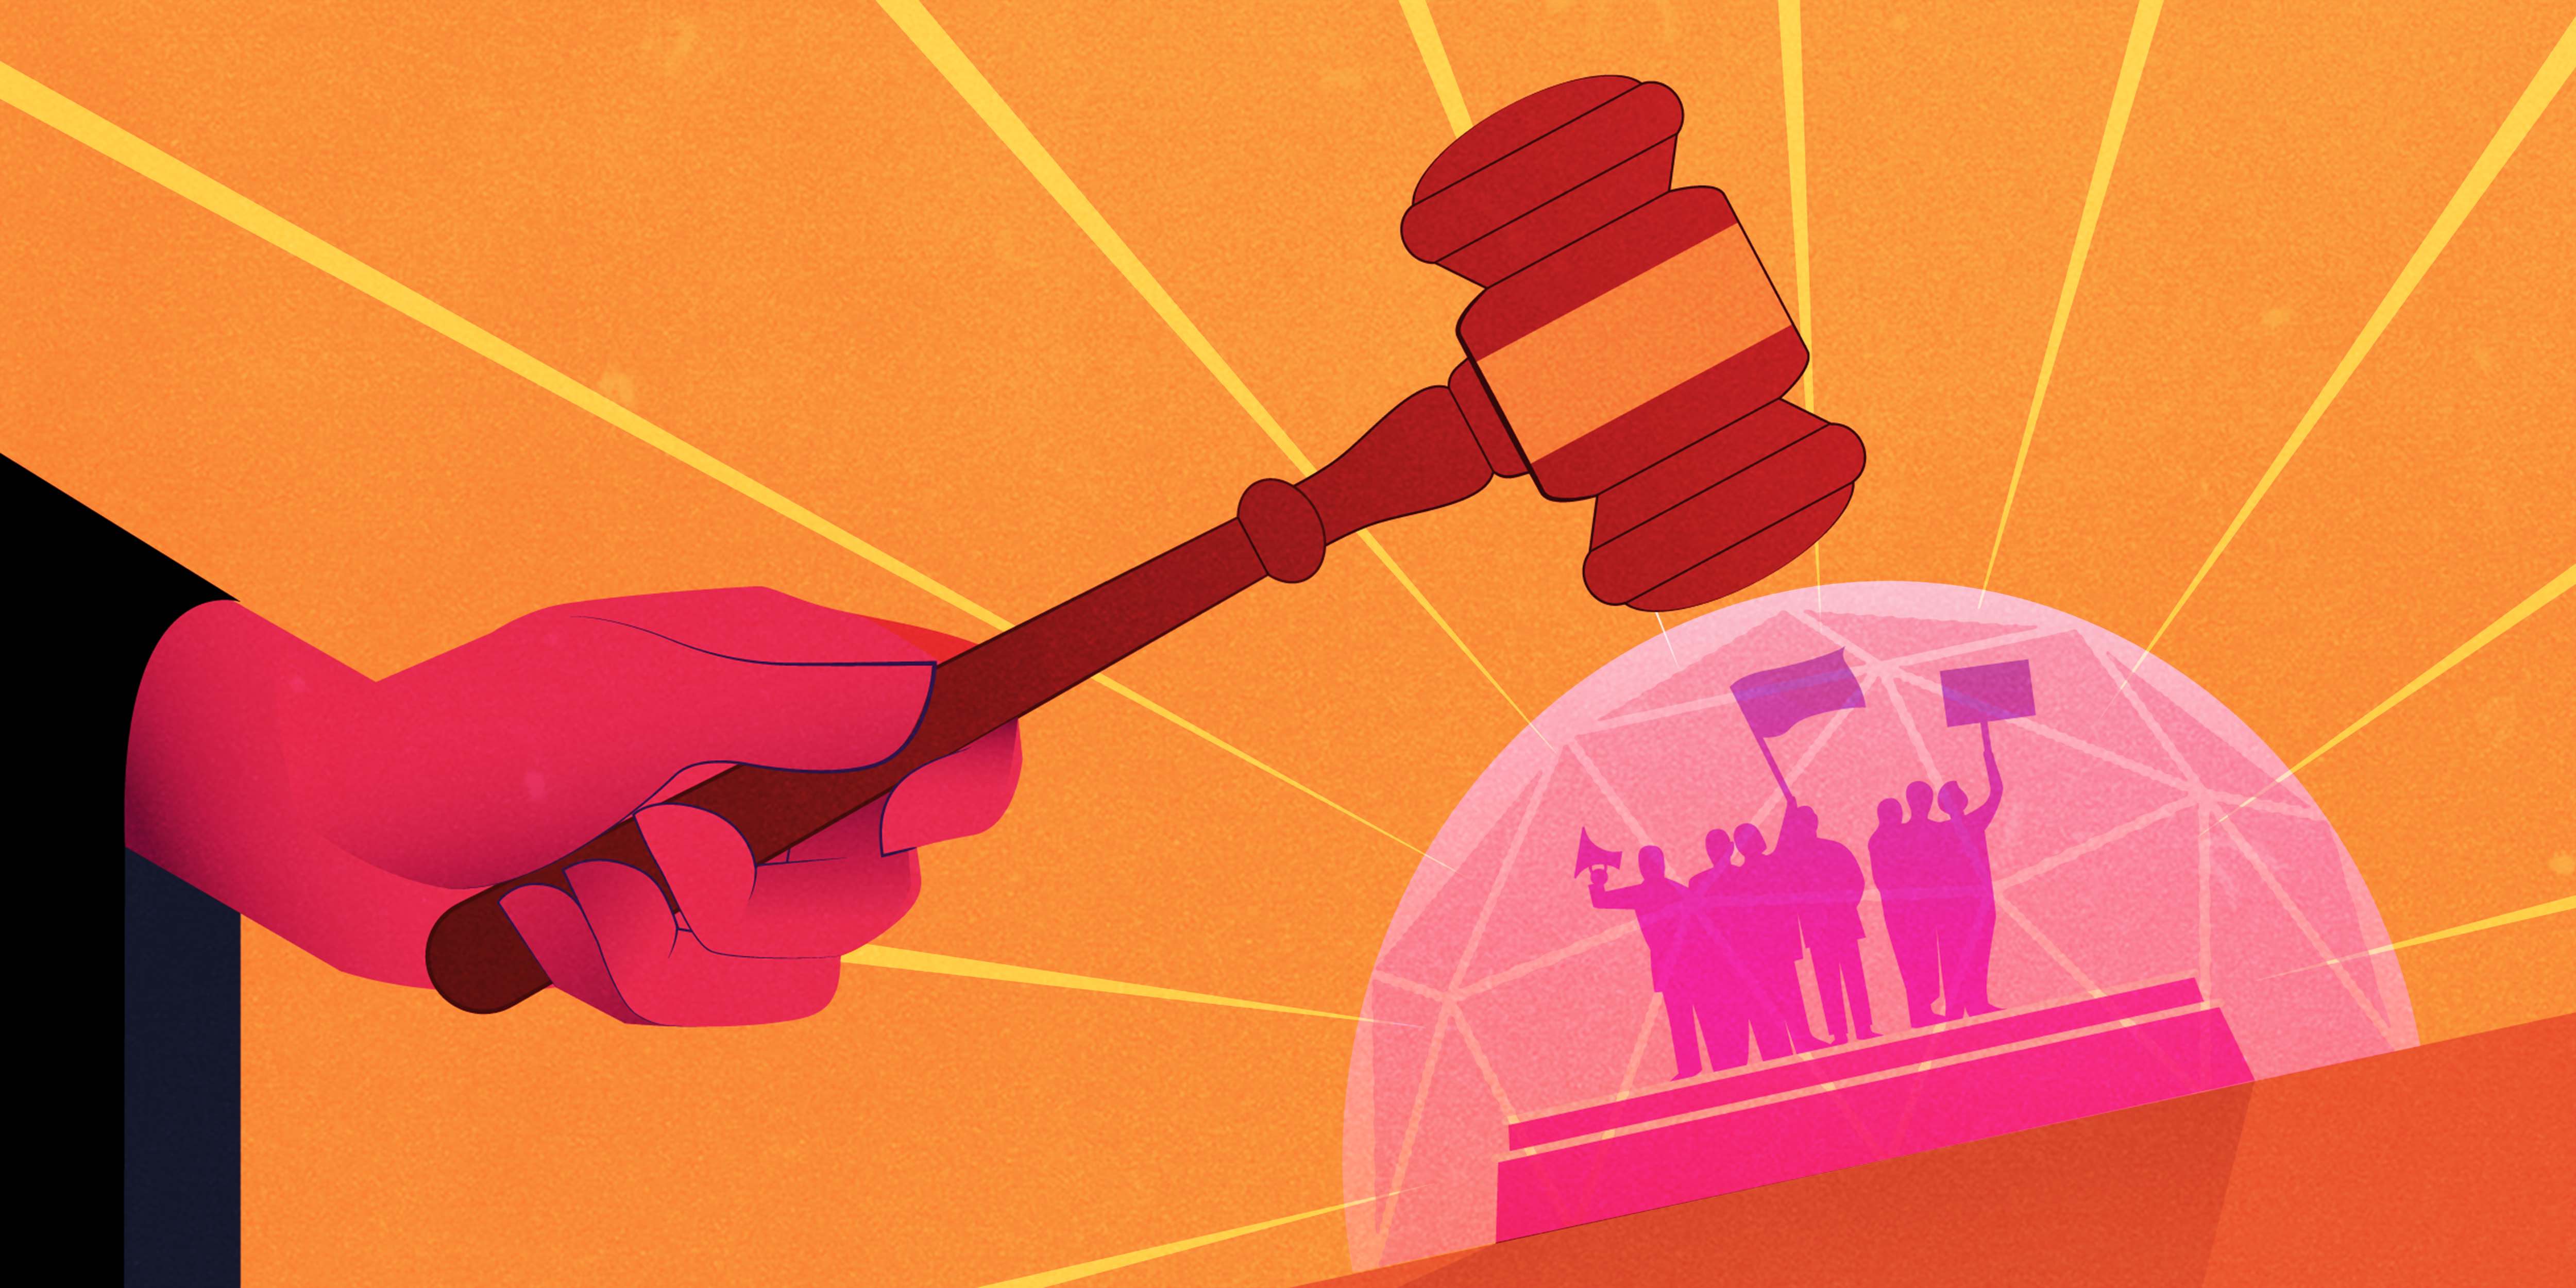 illustration of a gavel striking a bubble that contains protesters